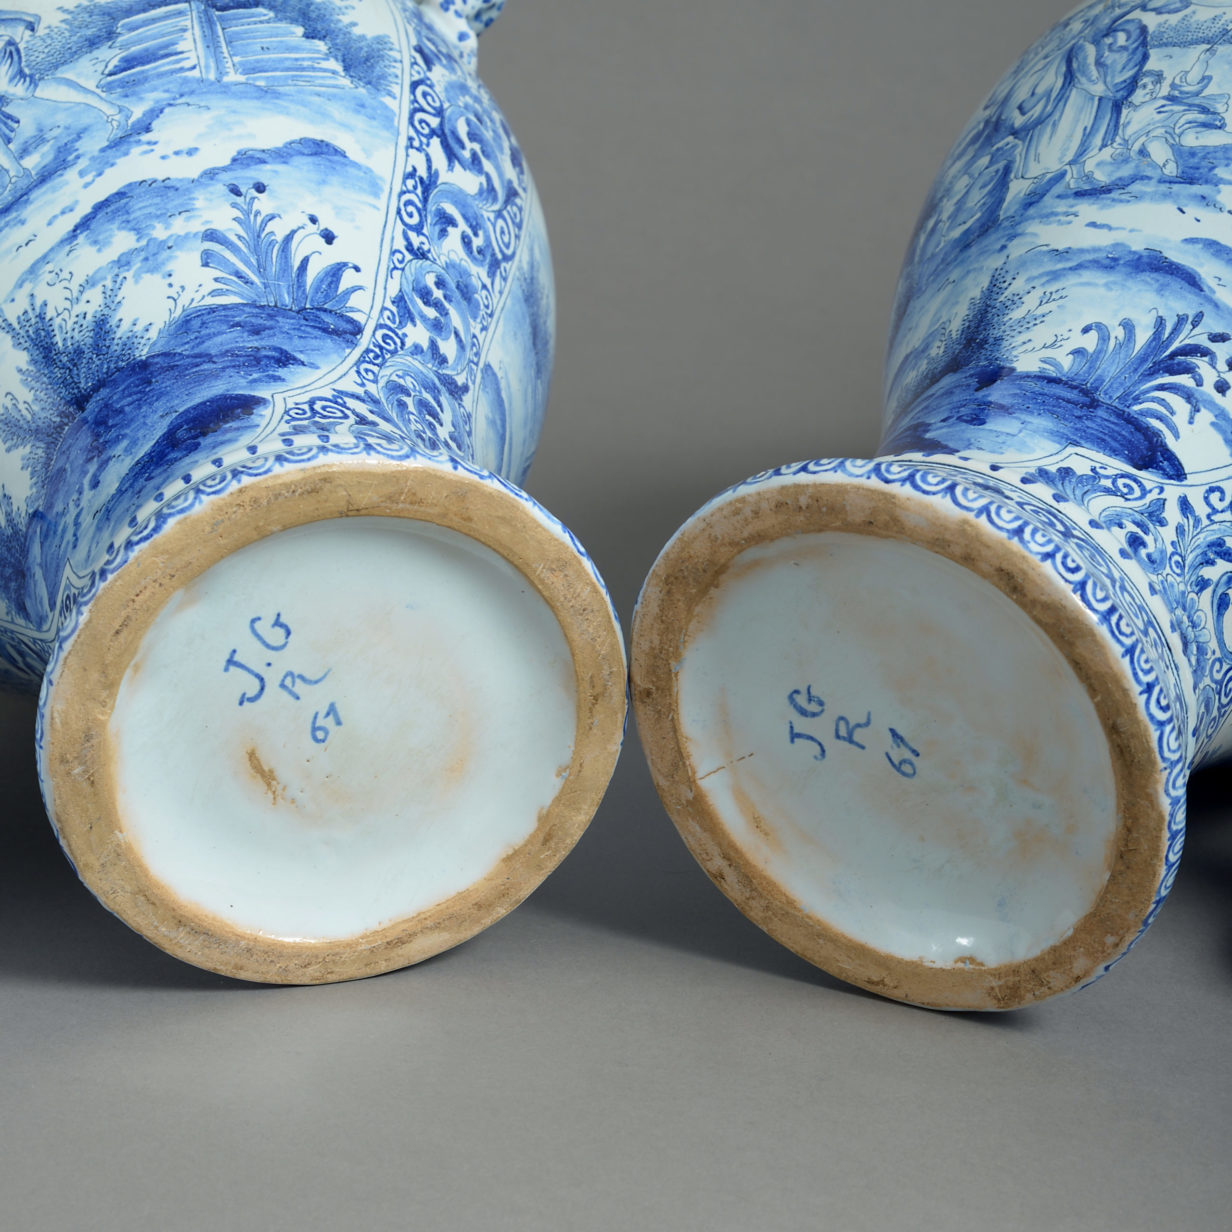 Pair of large delft vases and covers